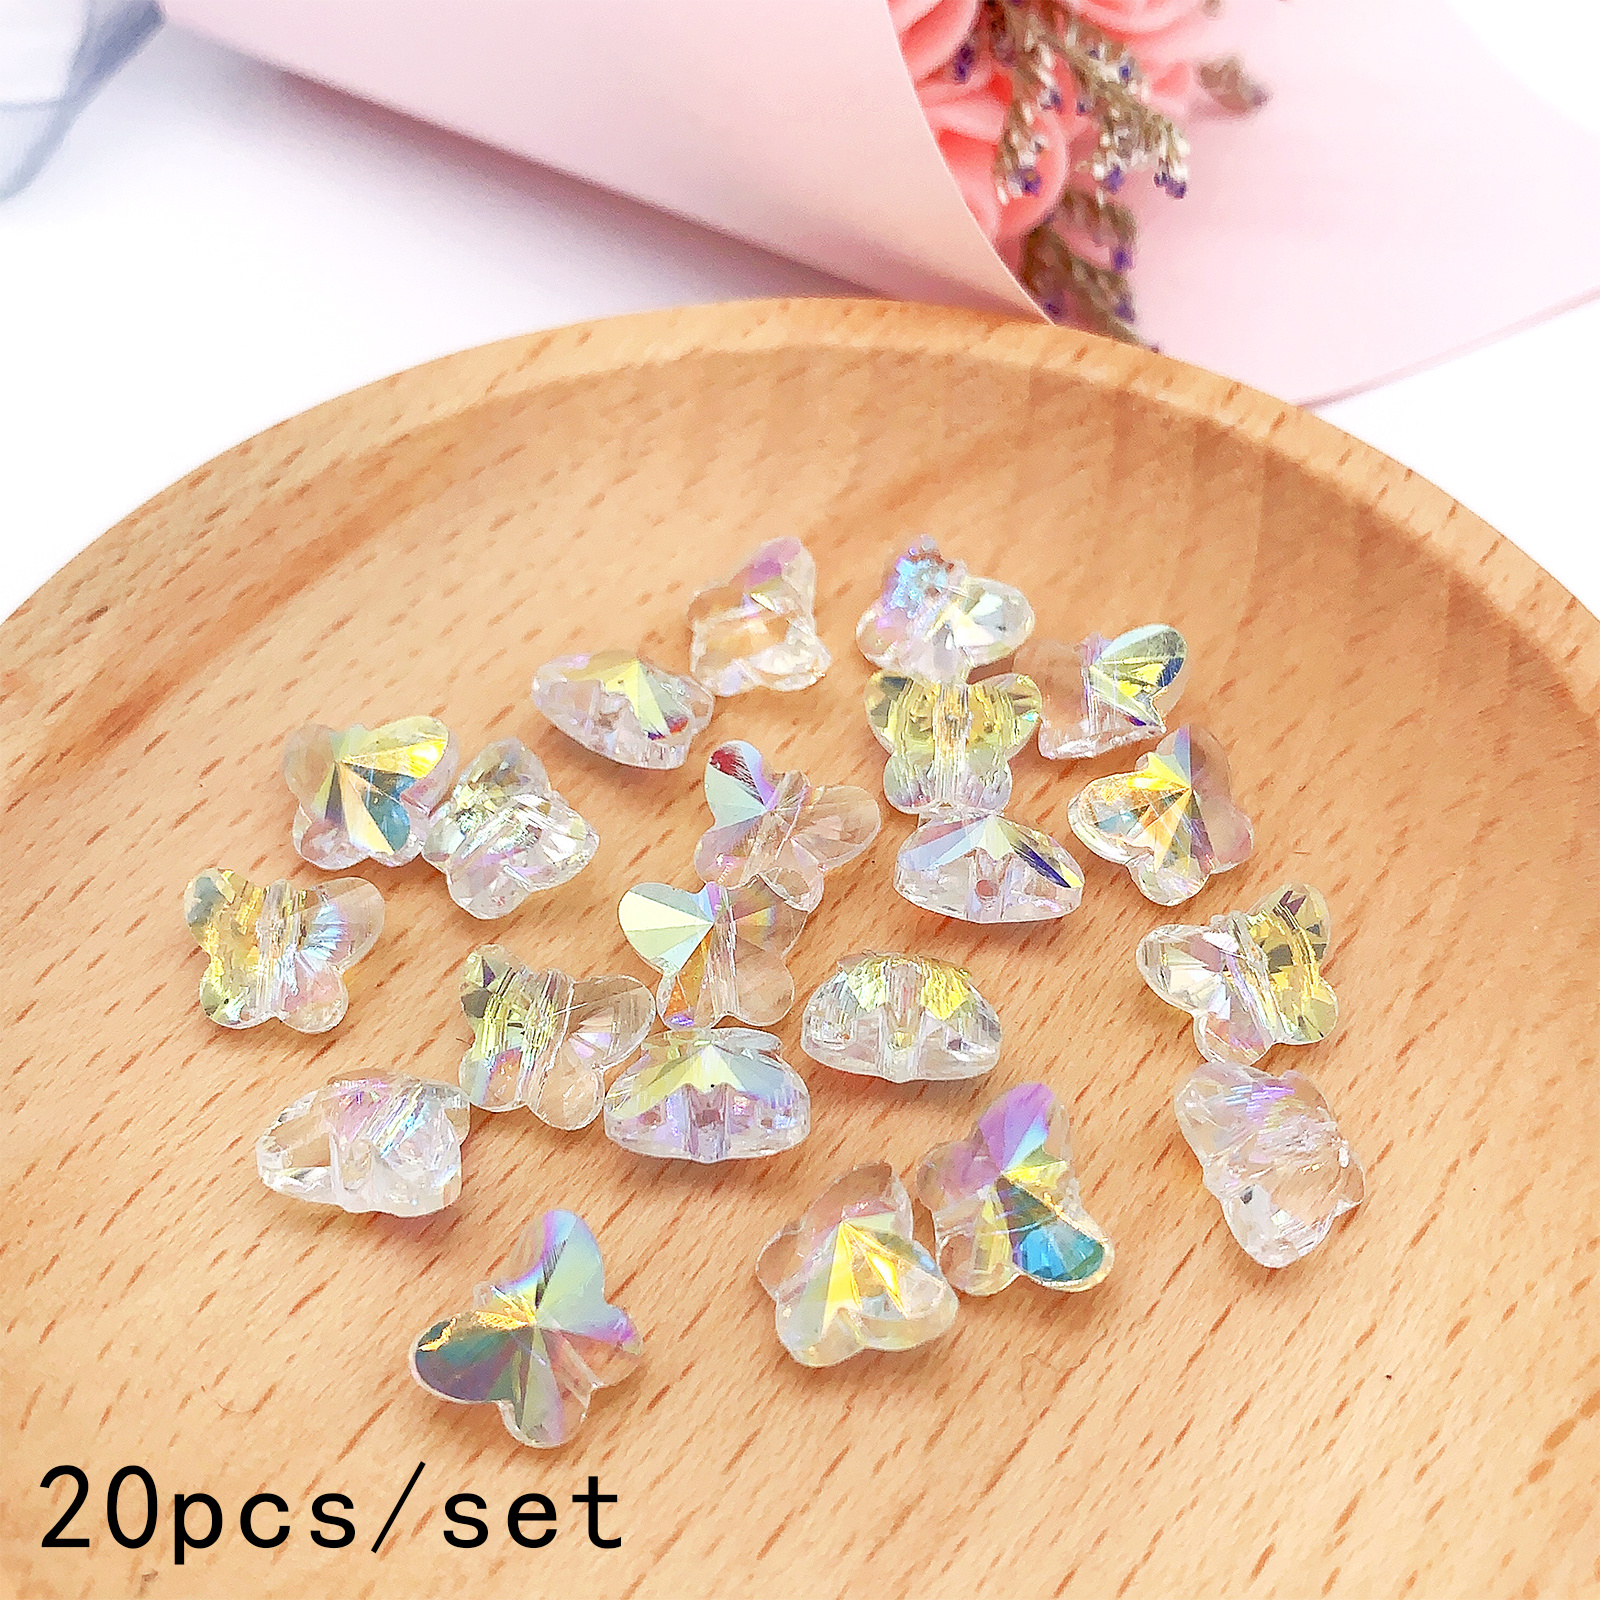  200pcs Mixed Butterfly Beads Butterfly Spacer Beads Glass Butterfly  Beads for Earring Bracelet Necklace Jewelry DIY Craft Making, 0.38 Inch